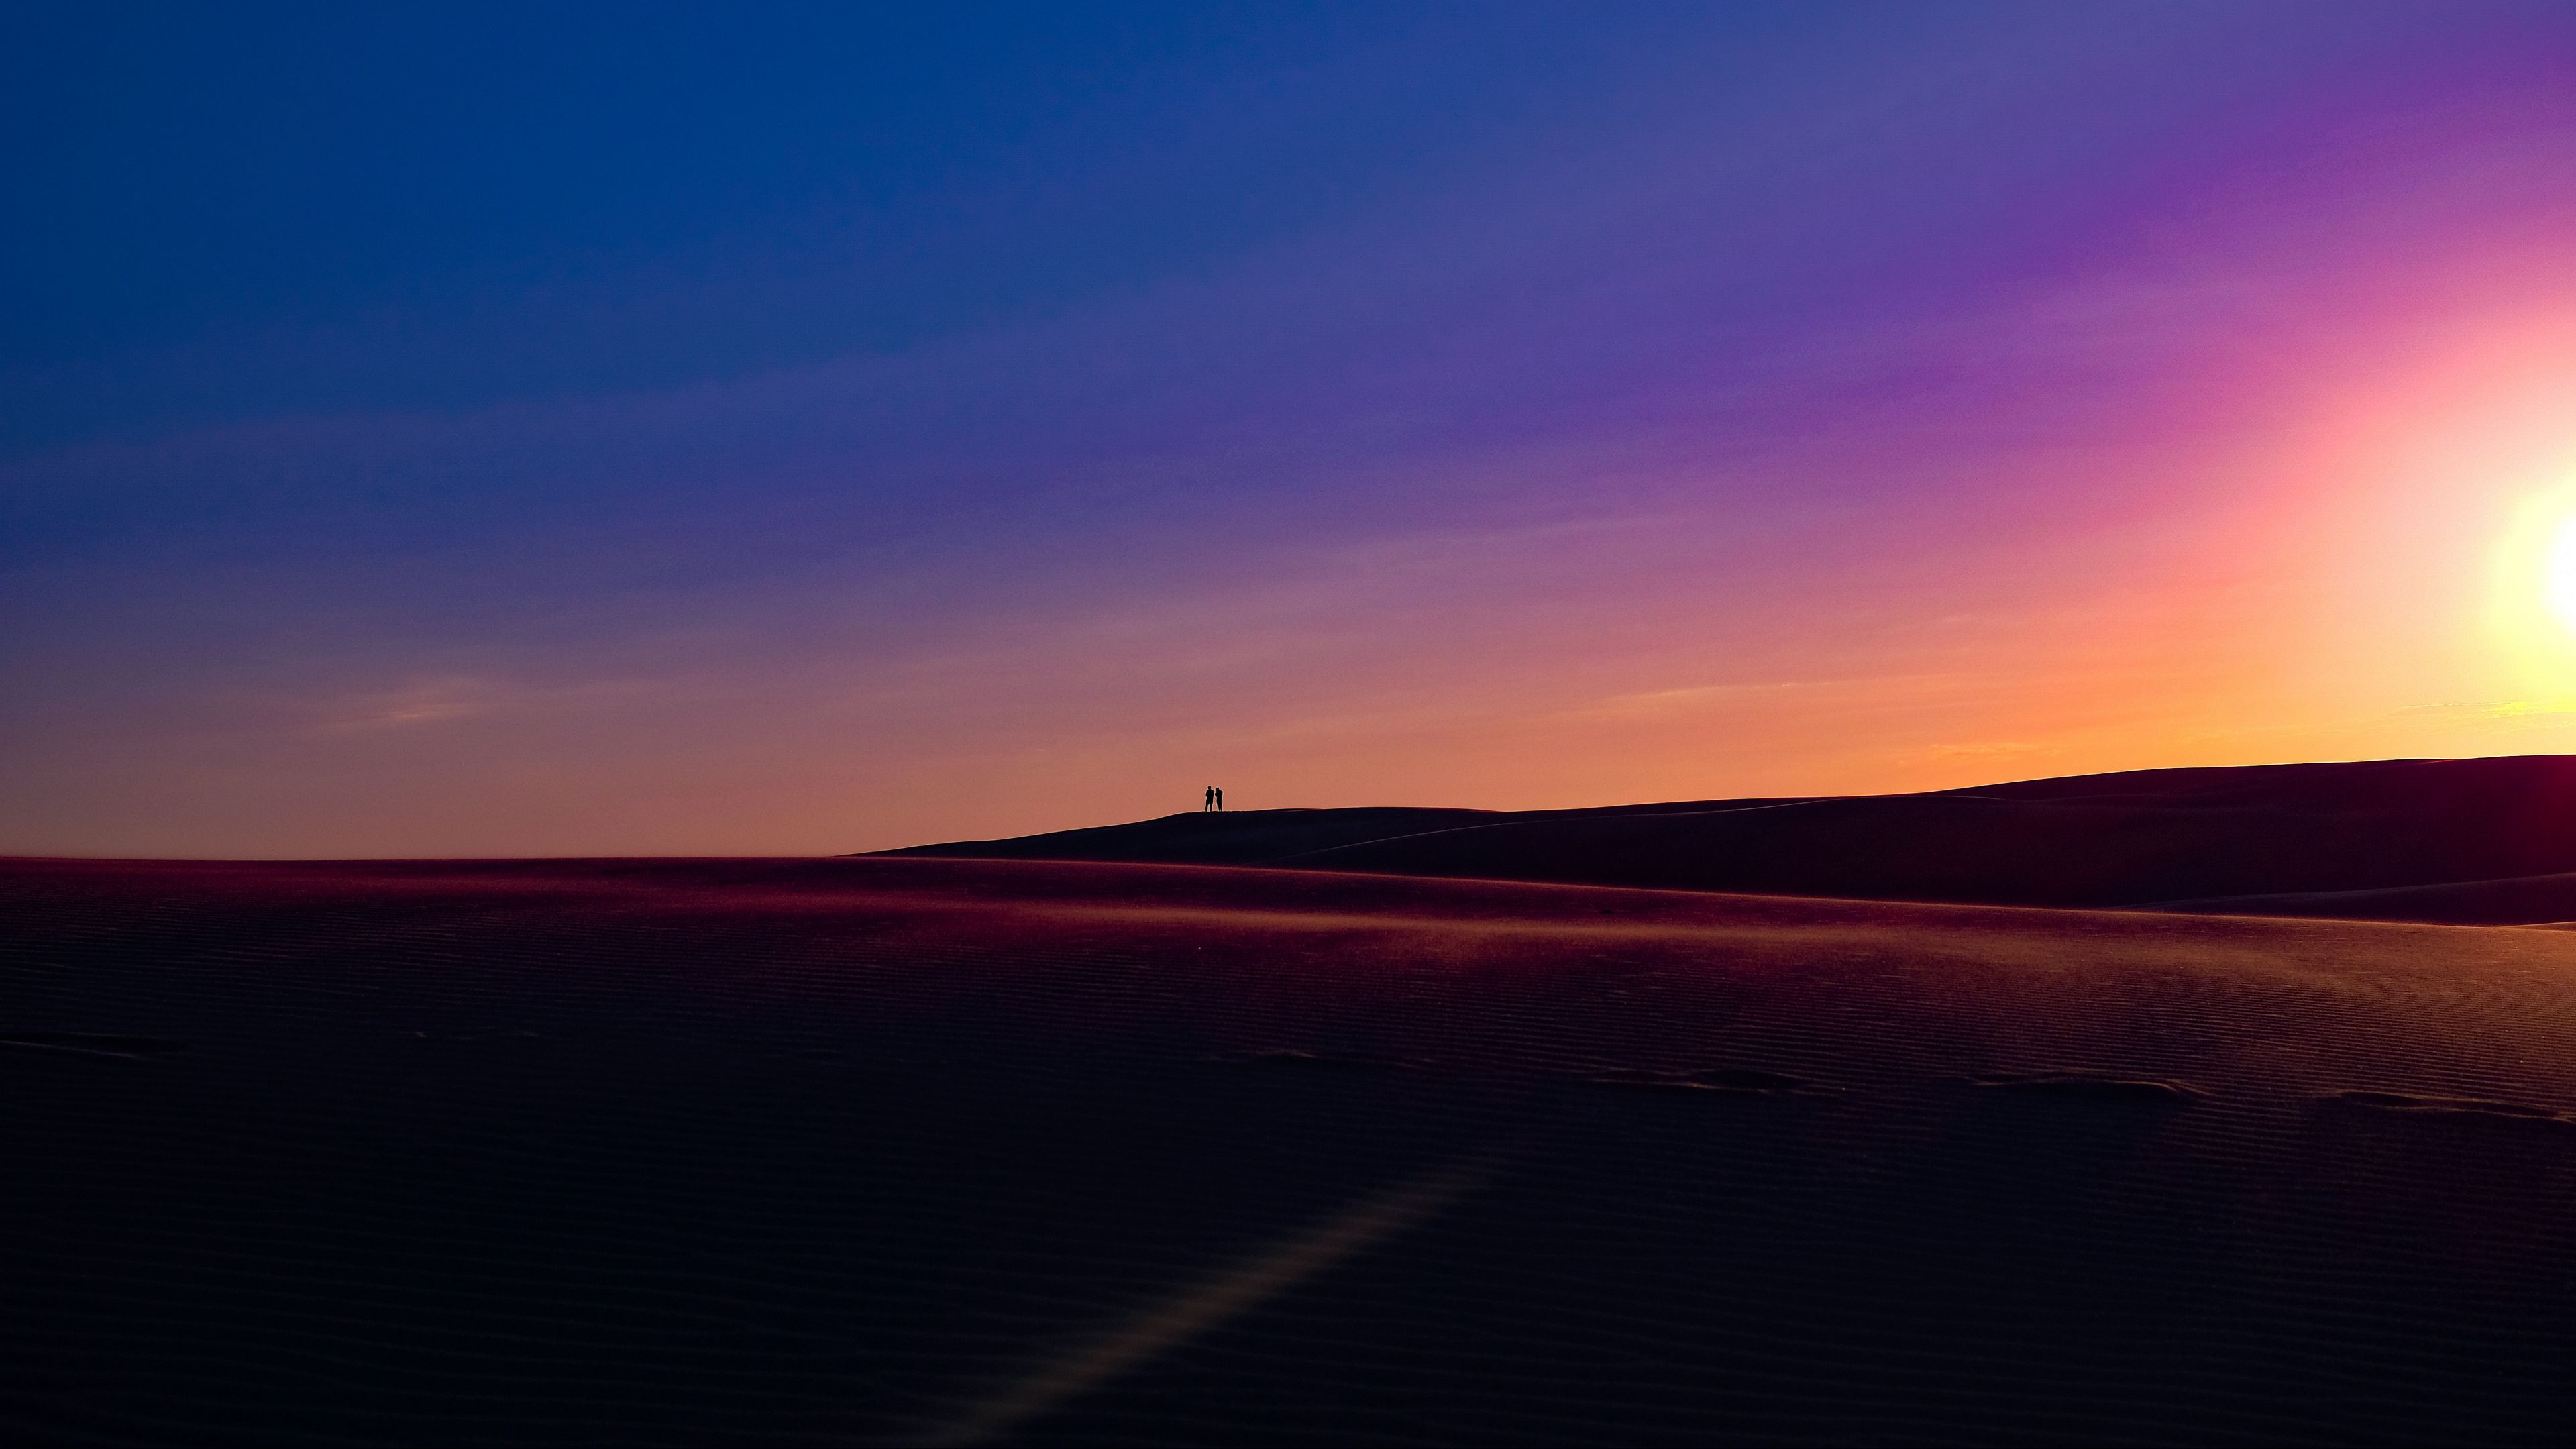 Download wallpaper 3840x2160 sunset, dunes, silhouettes, sand